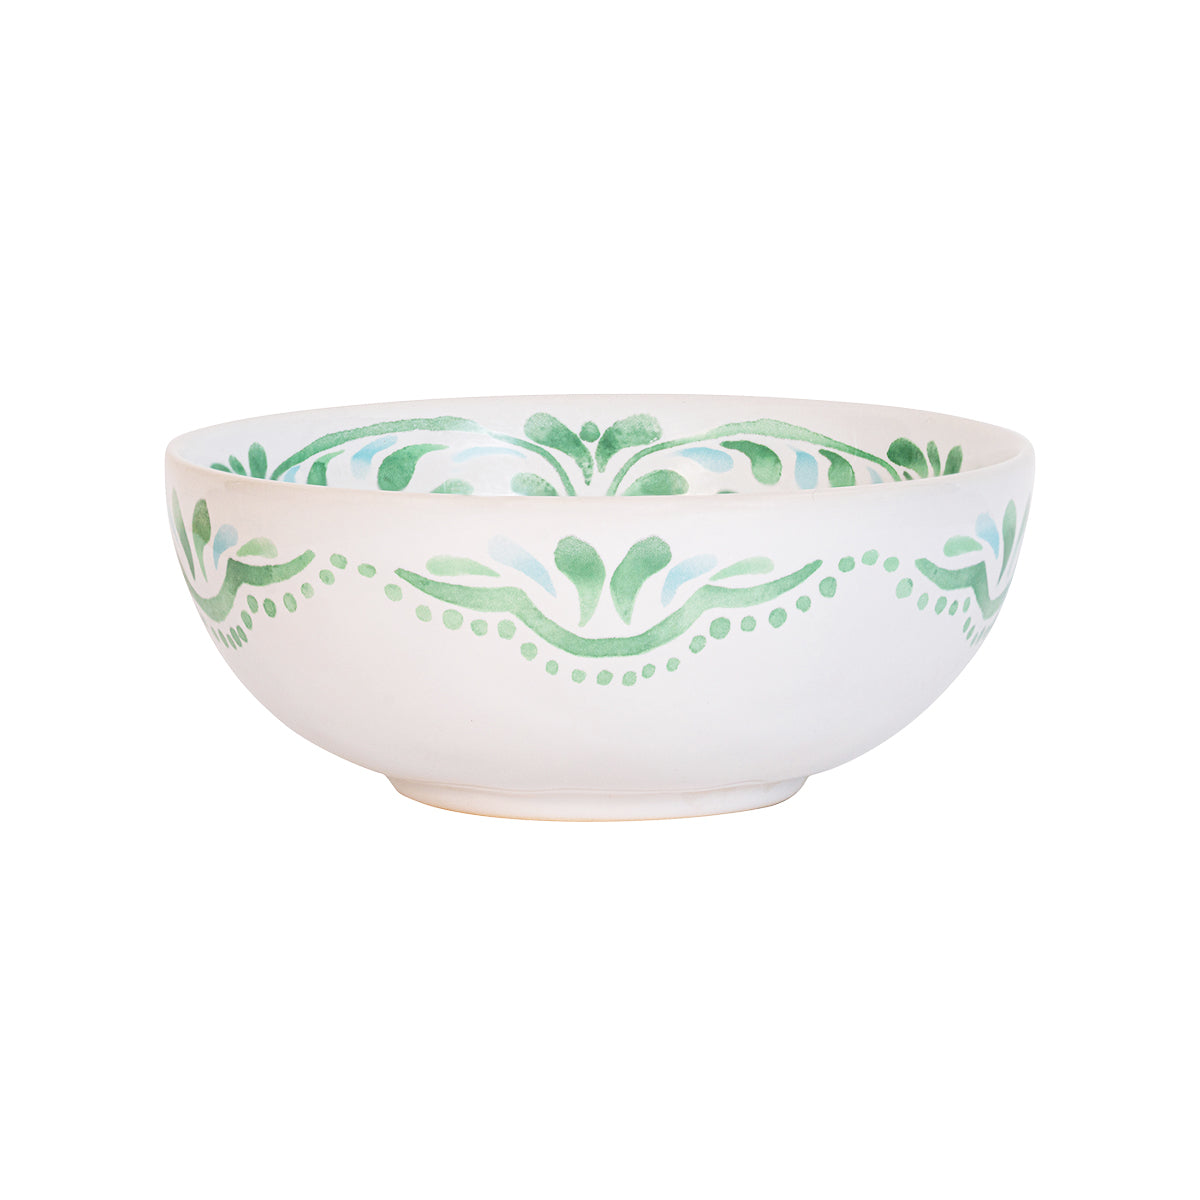 The beguiling pattern of this bowl was inspired by the intricately painted tiles we found on an escapade to the Iberian Coast and makes an eye-catching accent piece for tablesettings. Featuring a verdant palette of soft sage and sky-blue hues that are both refreshing and soothing - you will want to use this gorgeous green bowl for soups to berries to ice cream.